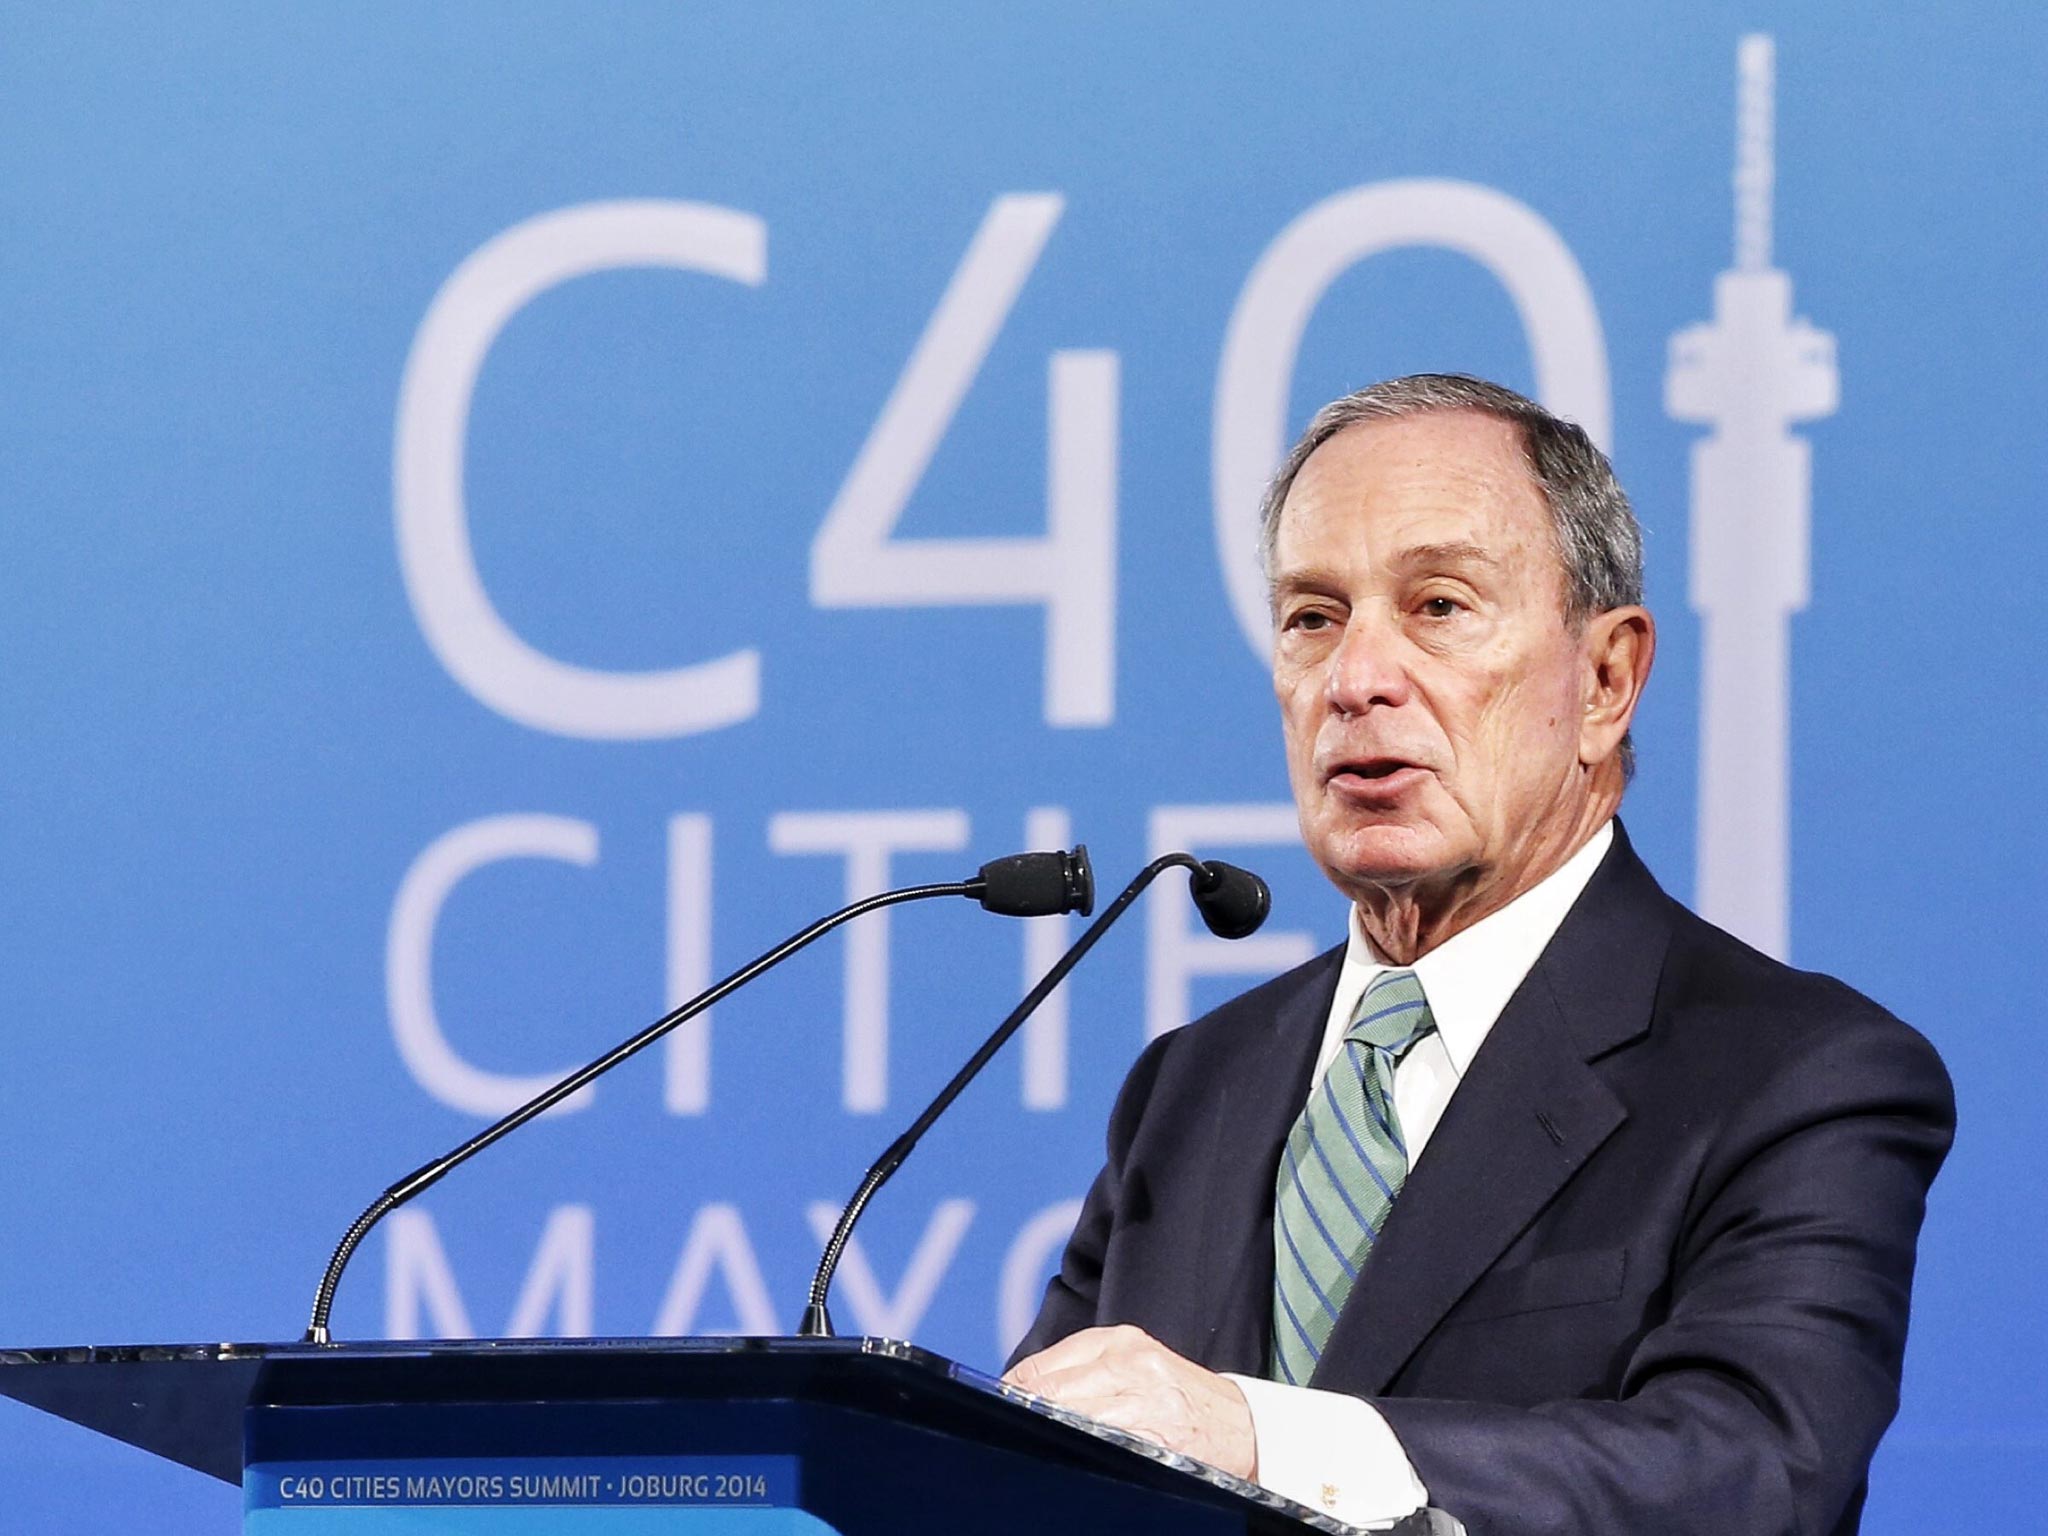 Michael Bloomberg, founder and owner of the data provider, which is beating its larger rival Reuters